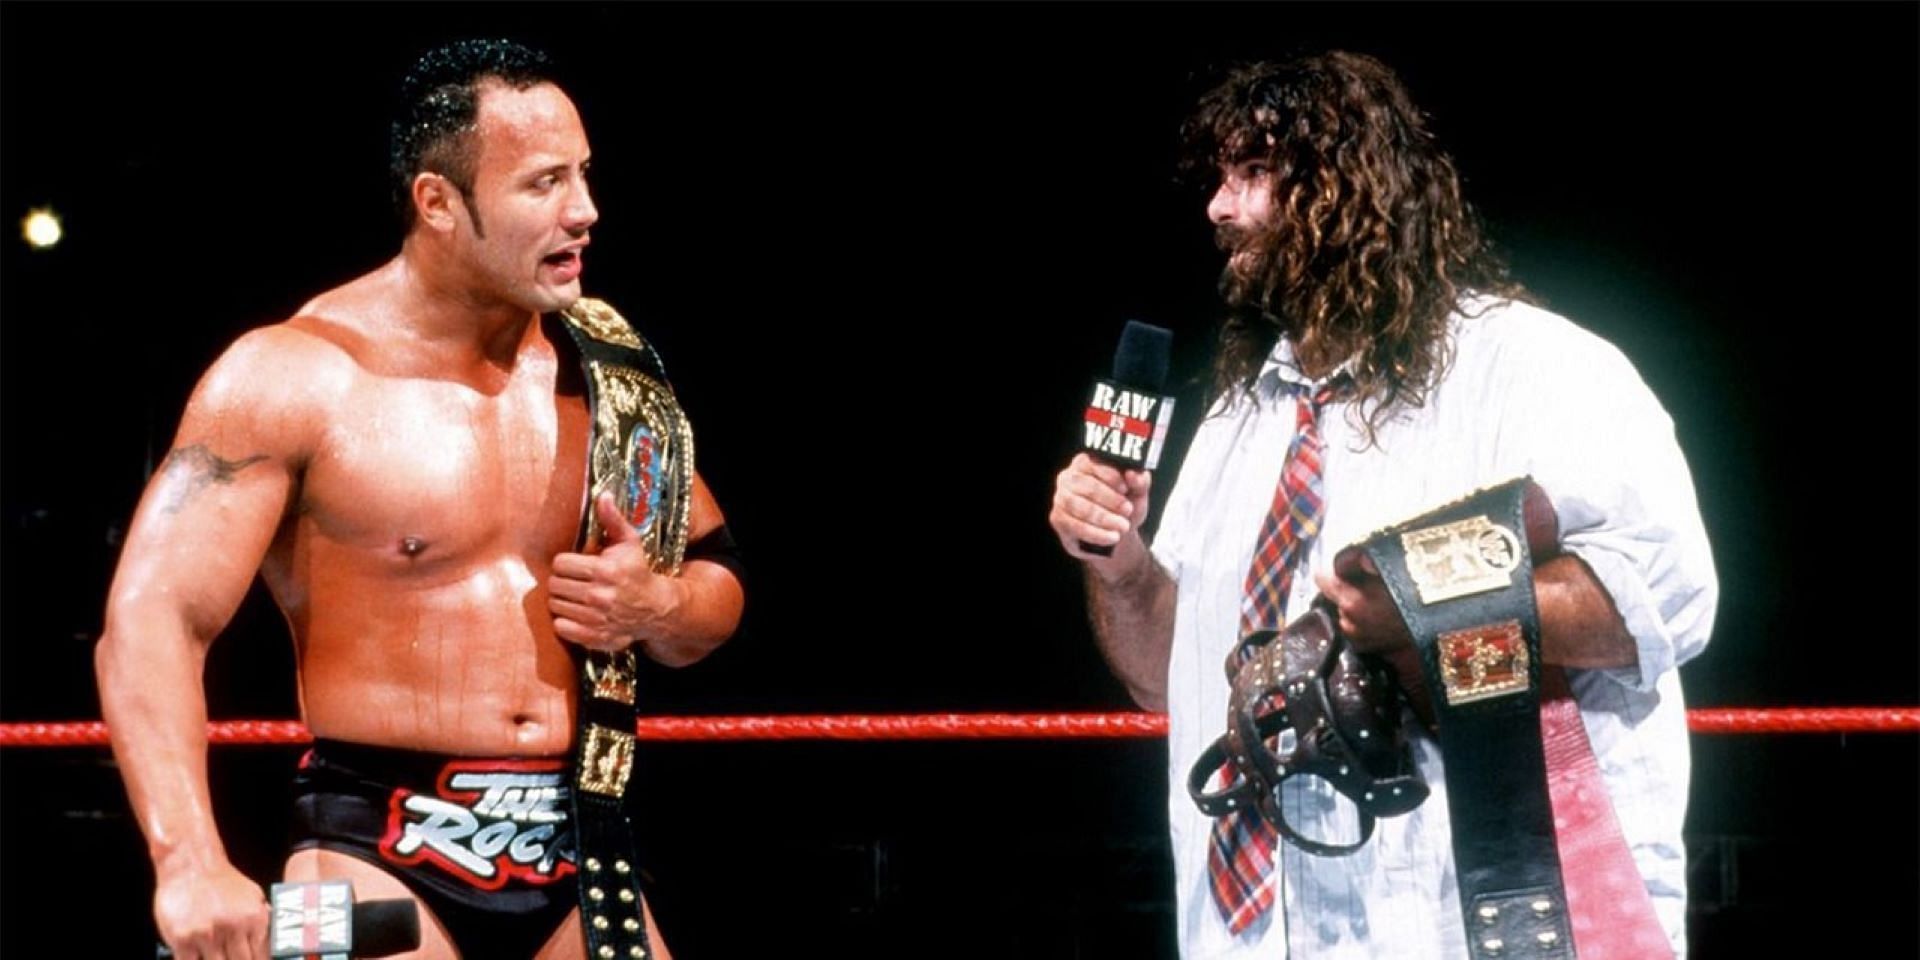 The Rock &#039;N&#039; Sock Connection was a strange but incredibly entertaining tag team